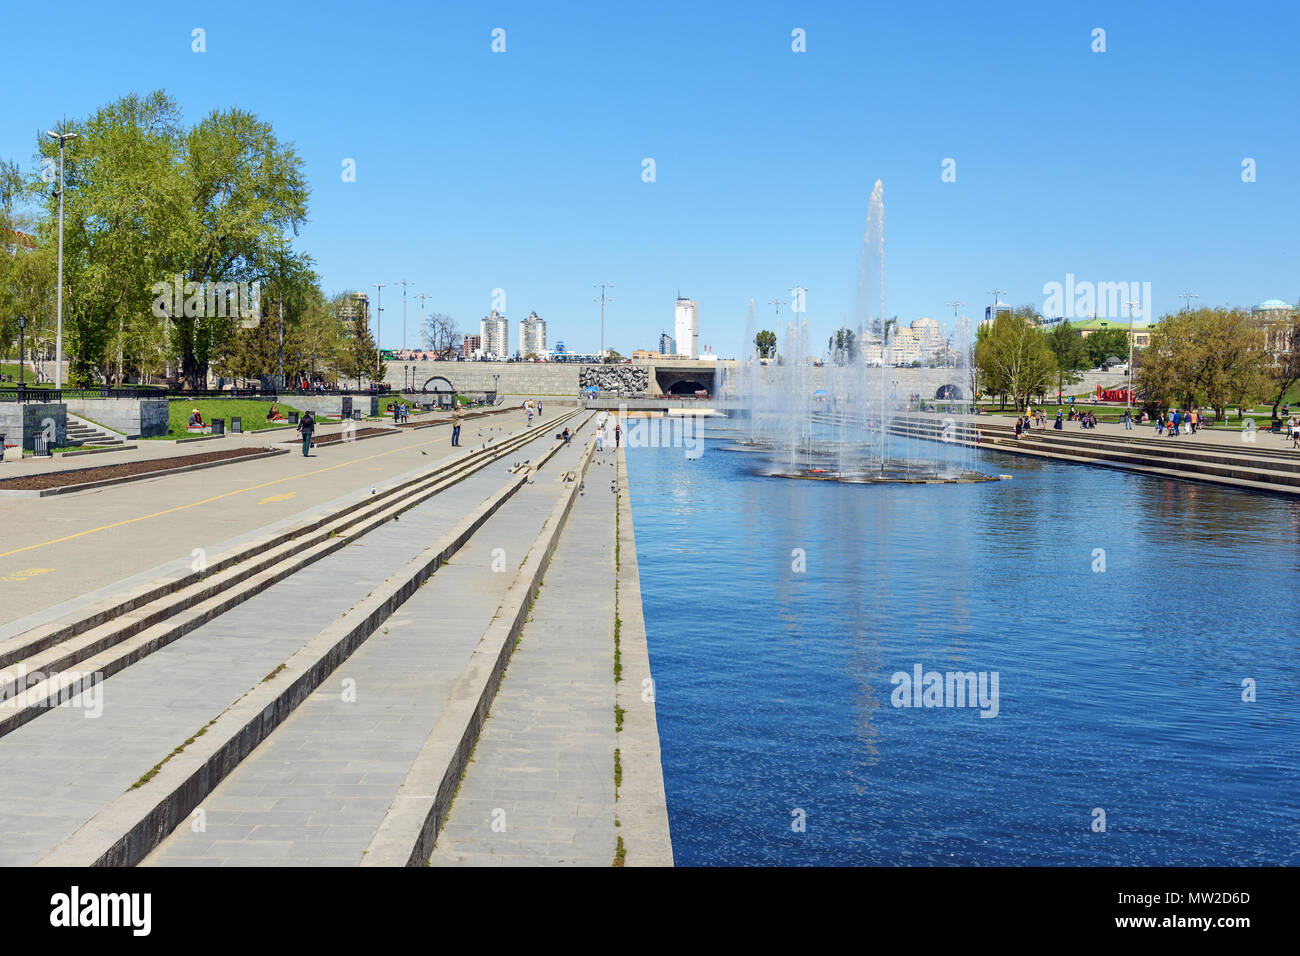 Yekaterinburg, Russia - May 23, 2018: Fountain in Historical Square on Iset River in center of city Stock Photo